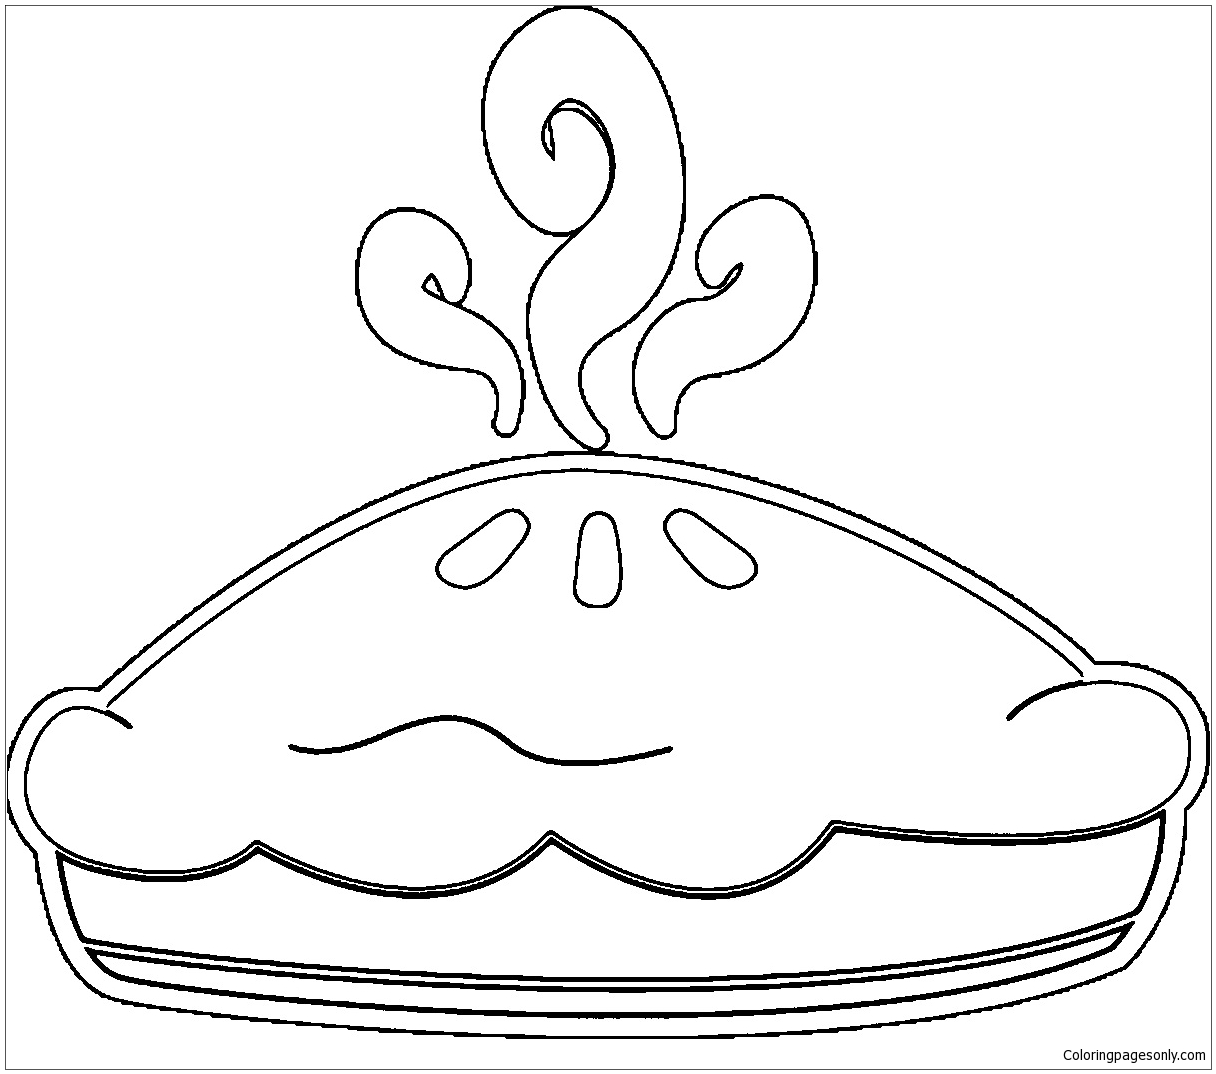 Better Pies Coloring Page